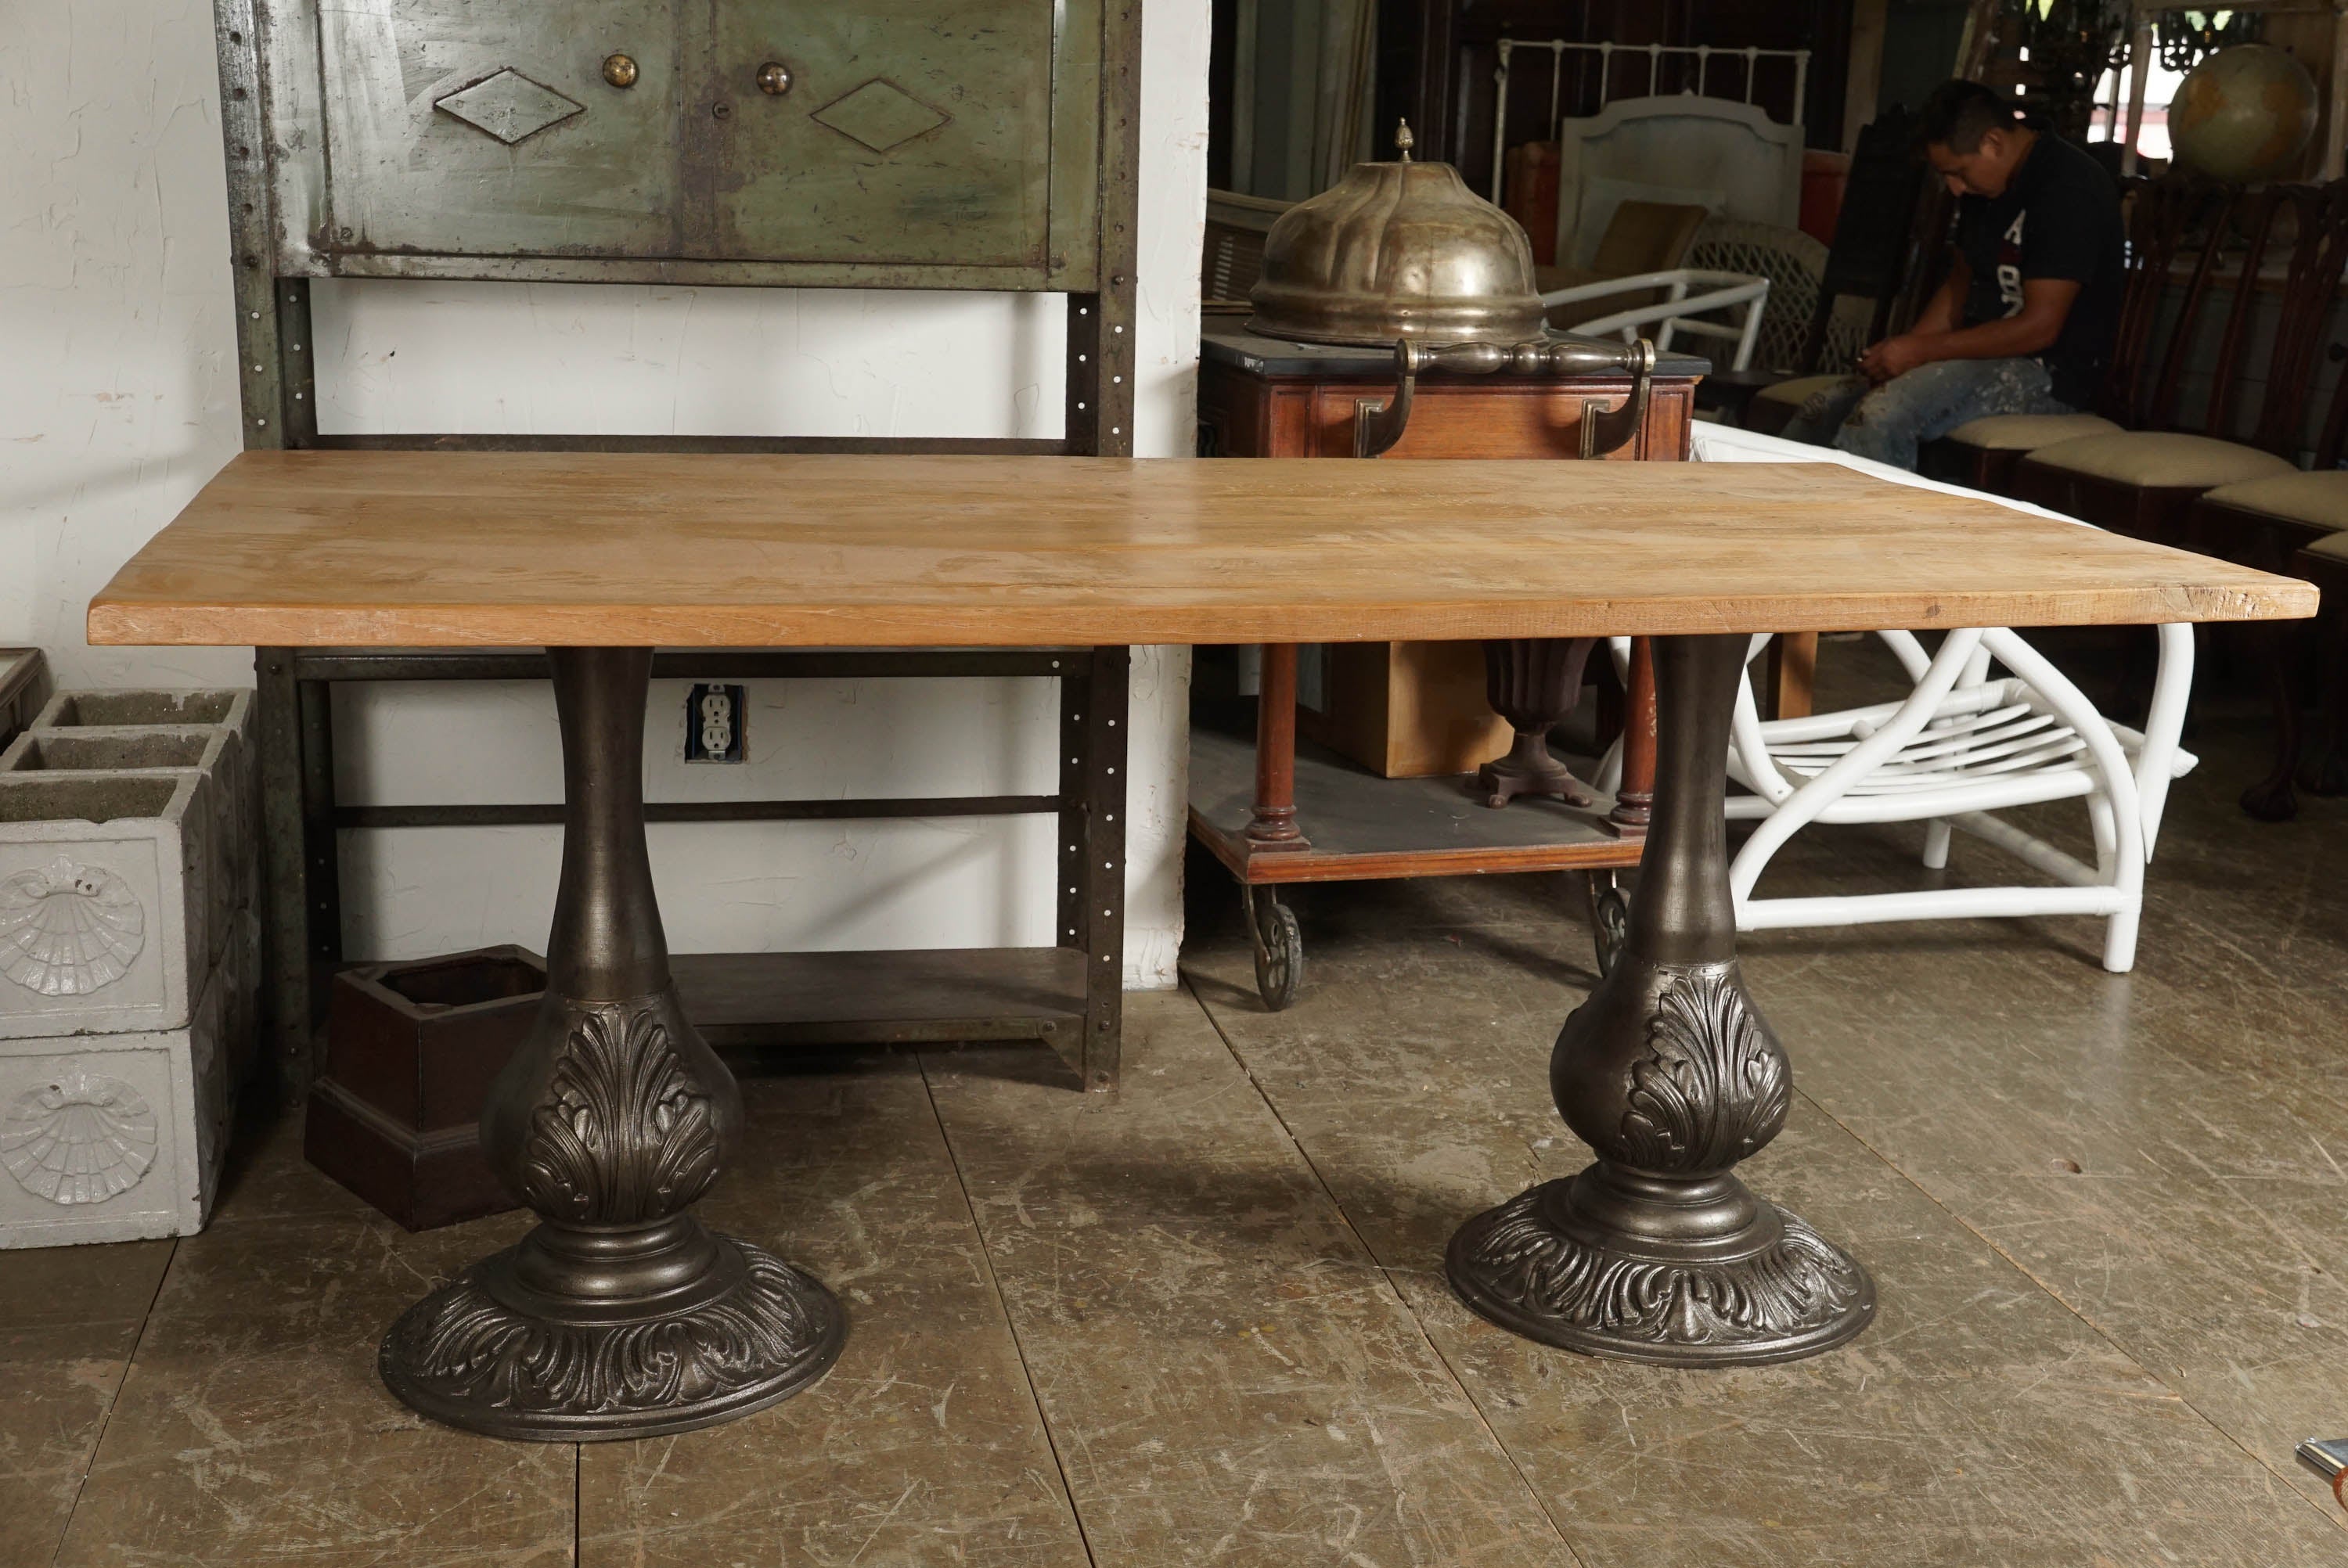 The top is composed of rustically smooth planks of teak wood, while the pair of pedestals are of antique silver cast iron. Each, decorated with acanthus leaves, has at the top four flanges with holes for securing the thick teak wood board. Top and